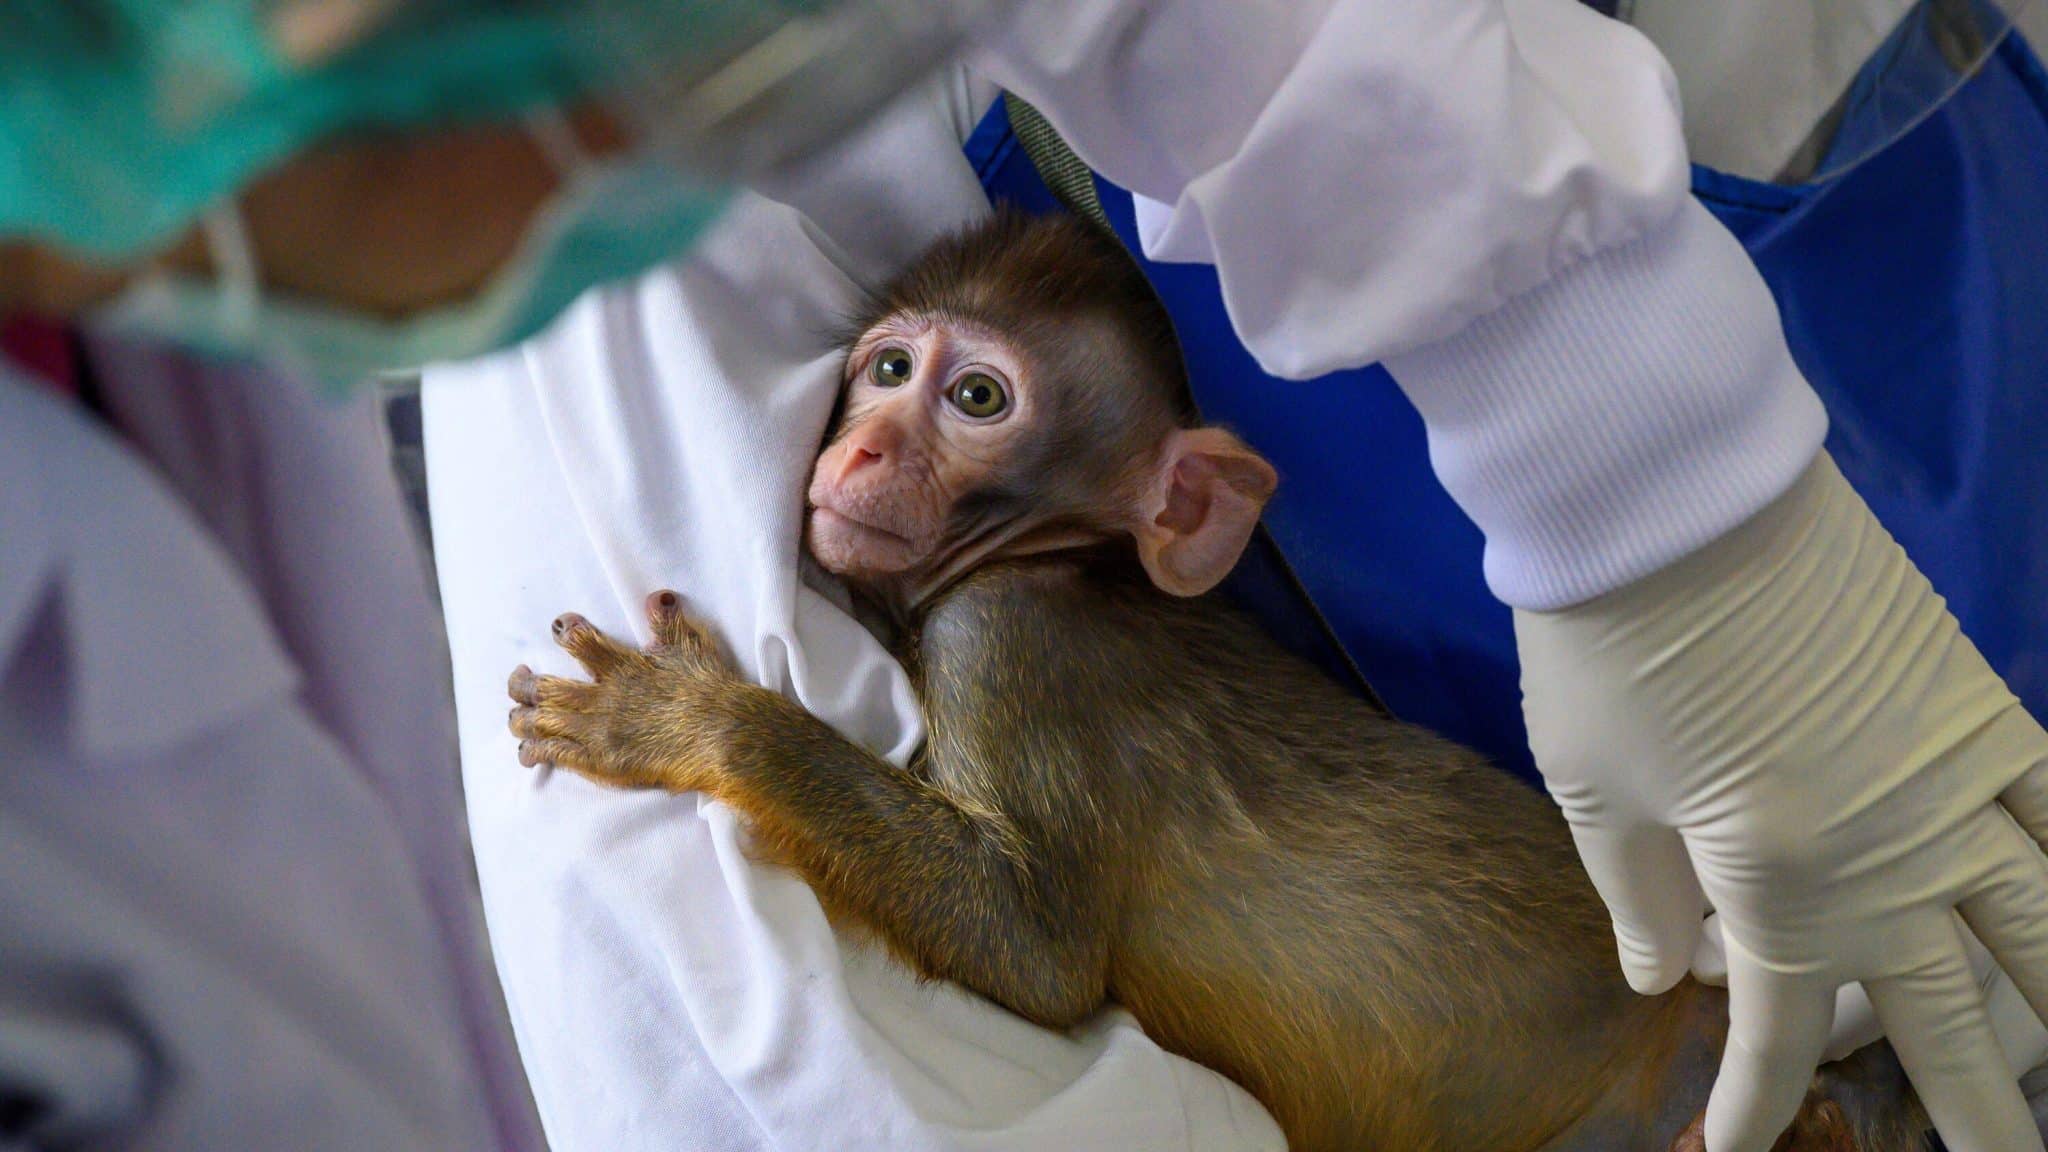 A person in a white coat holding a monkey